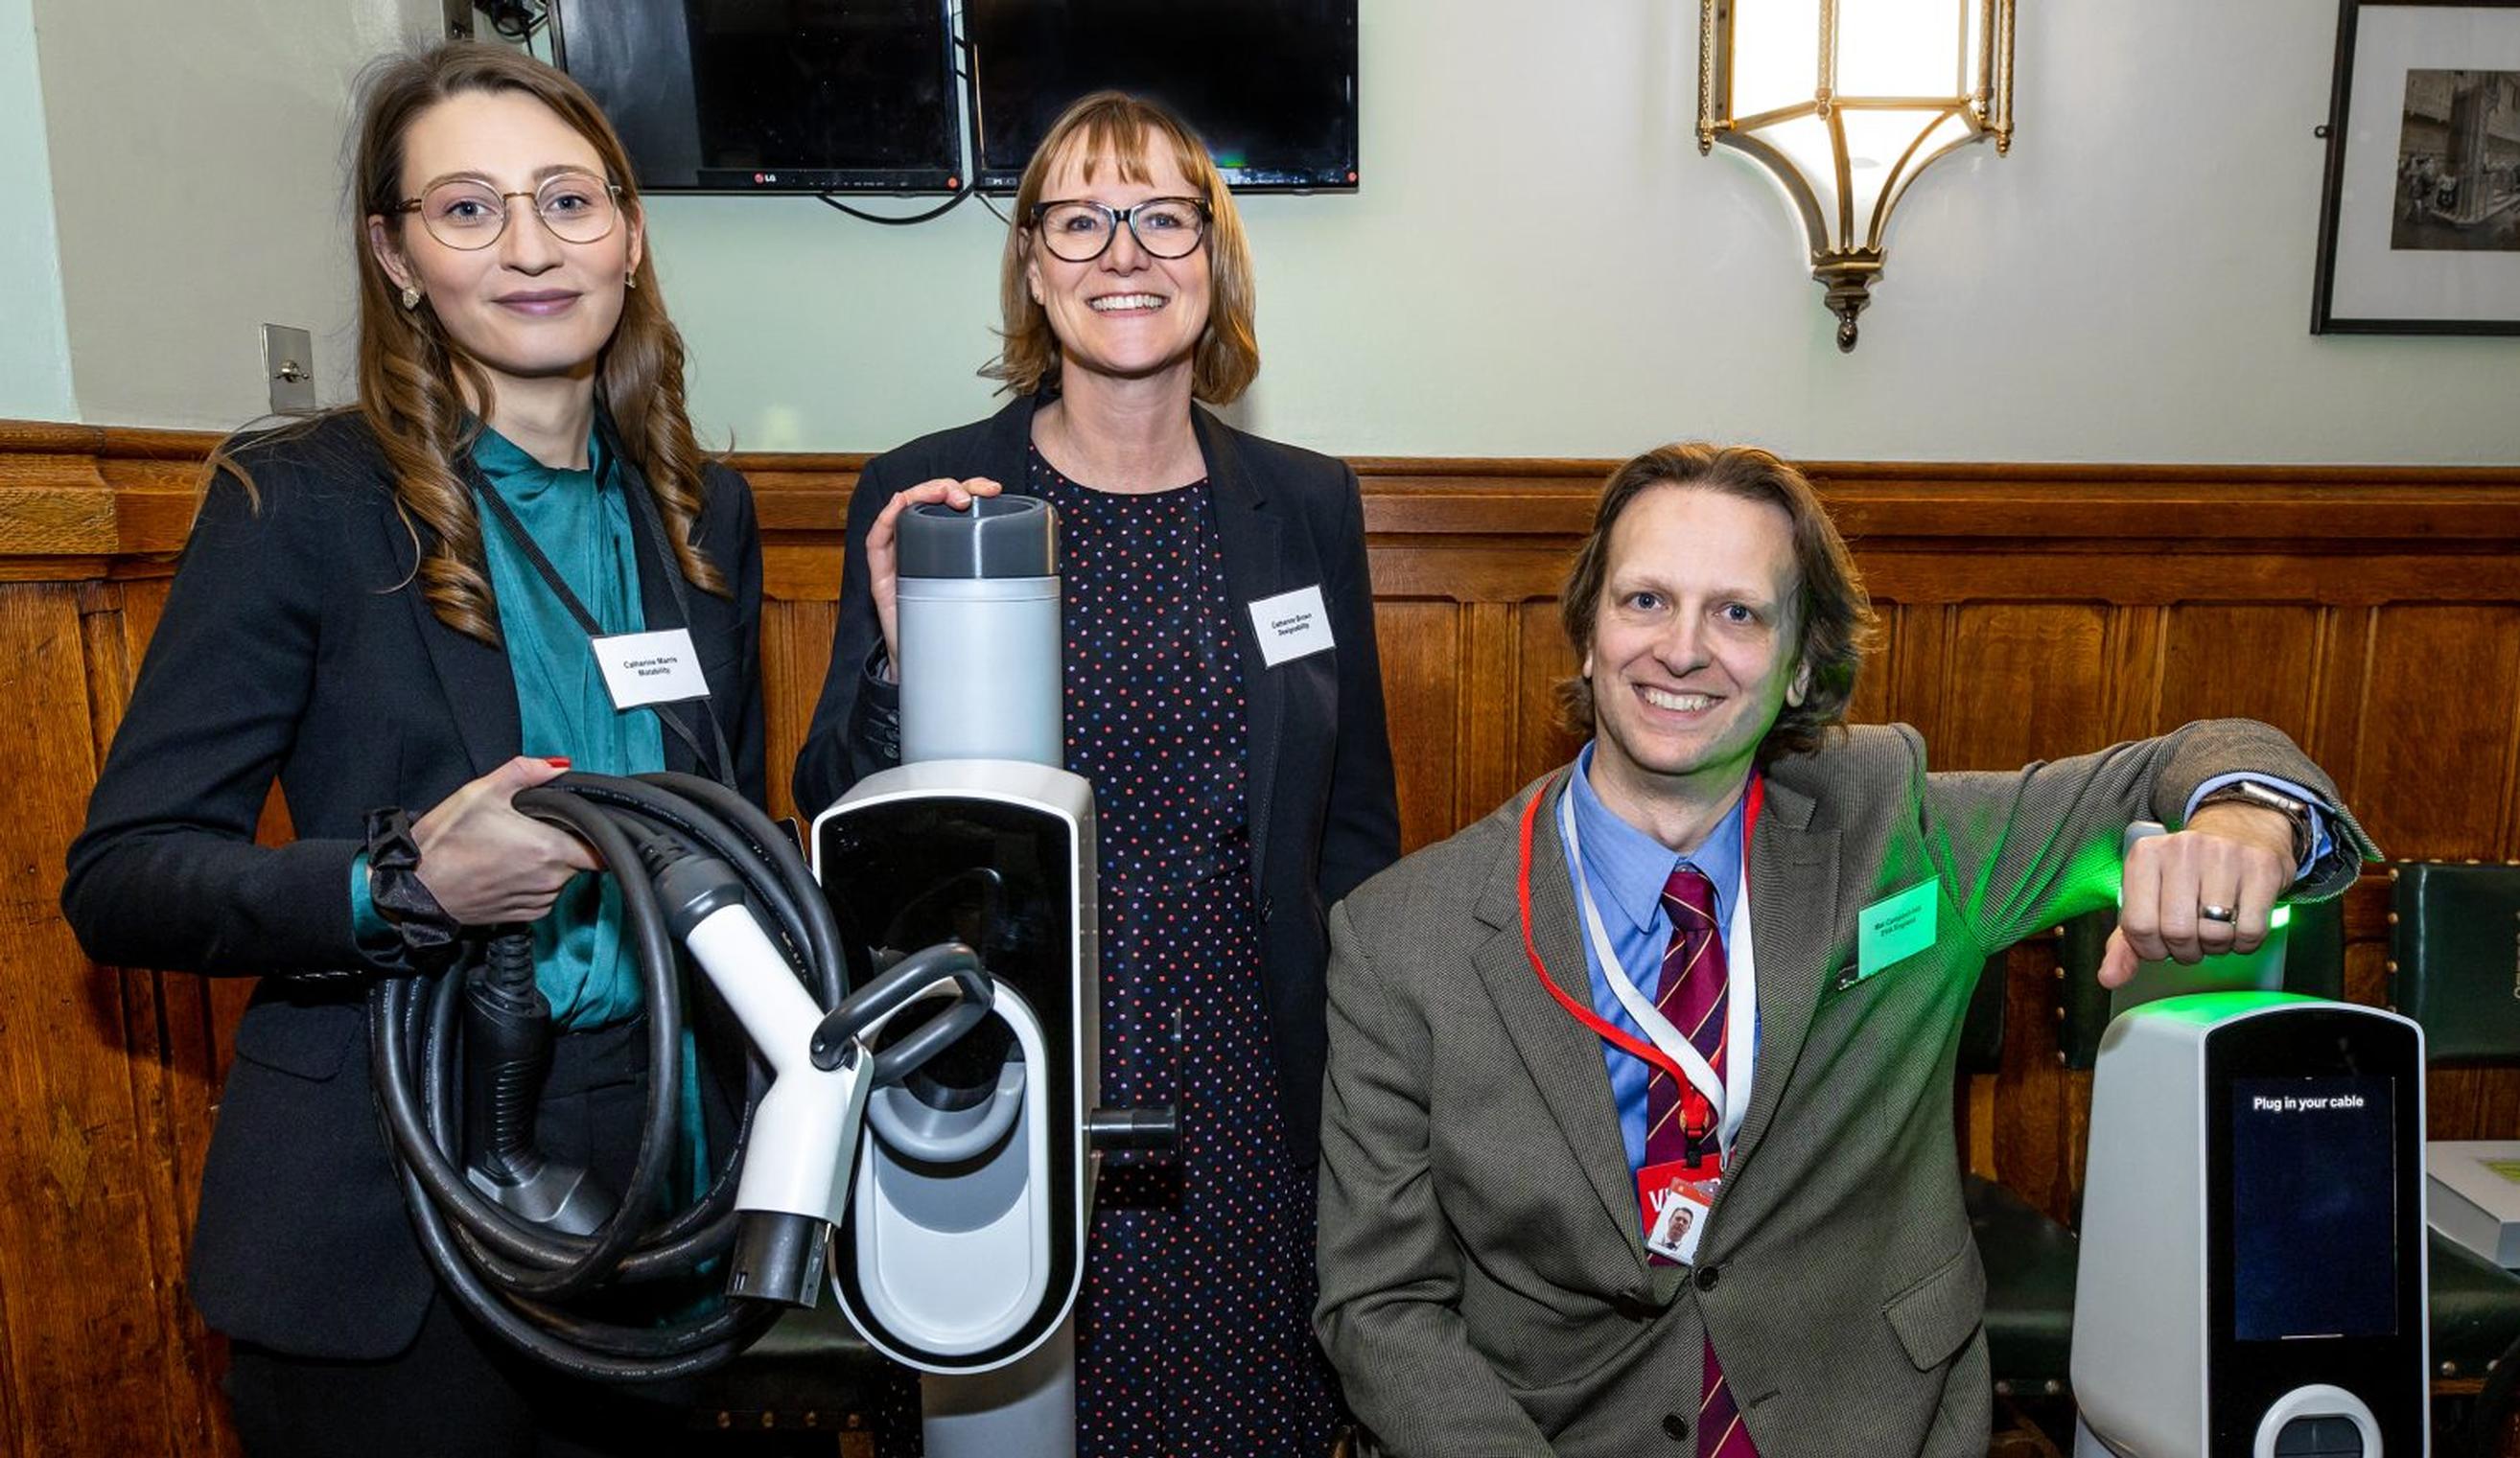 Motability`s House of Commons reception on 21 November was held to mark the launch of new British Standards Institute (BSI) standard for accessible EV charging